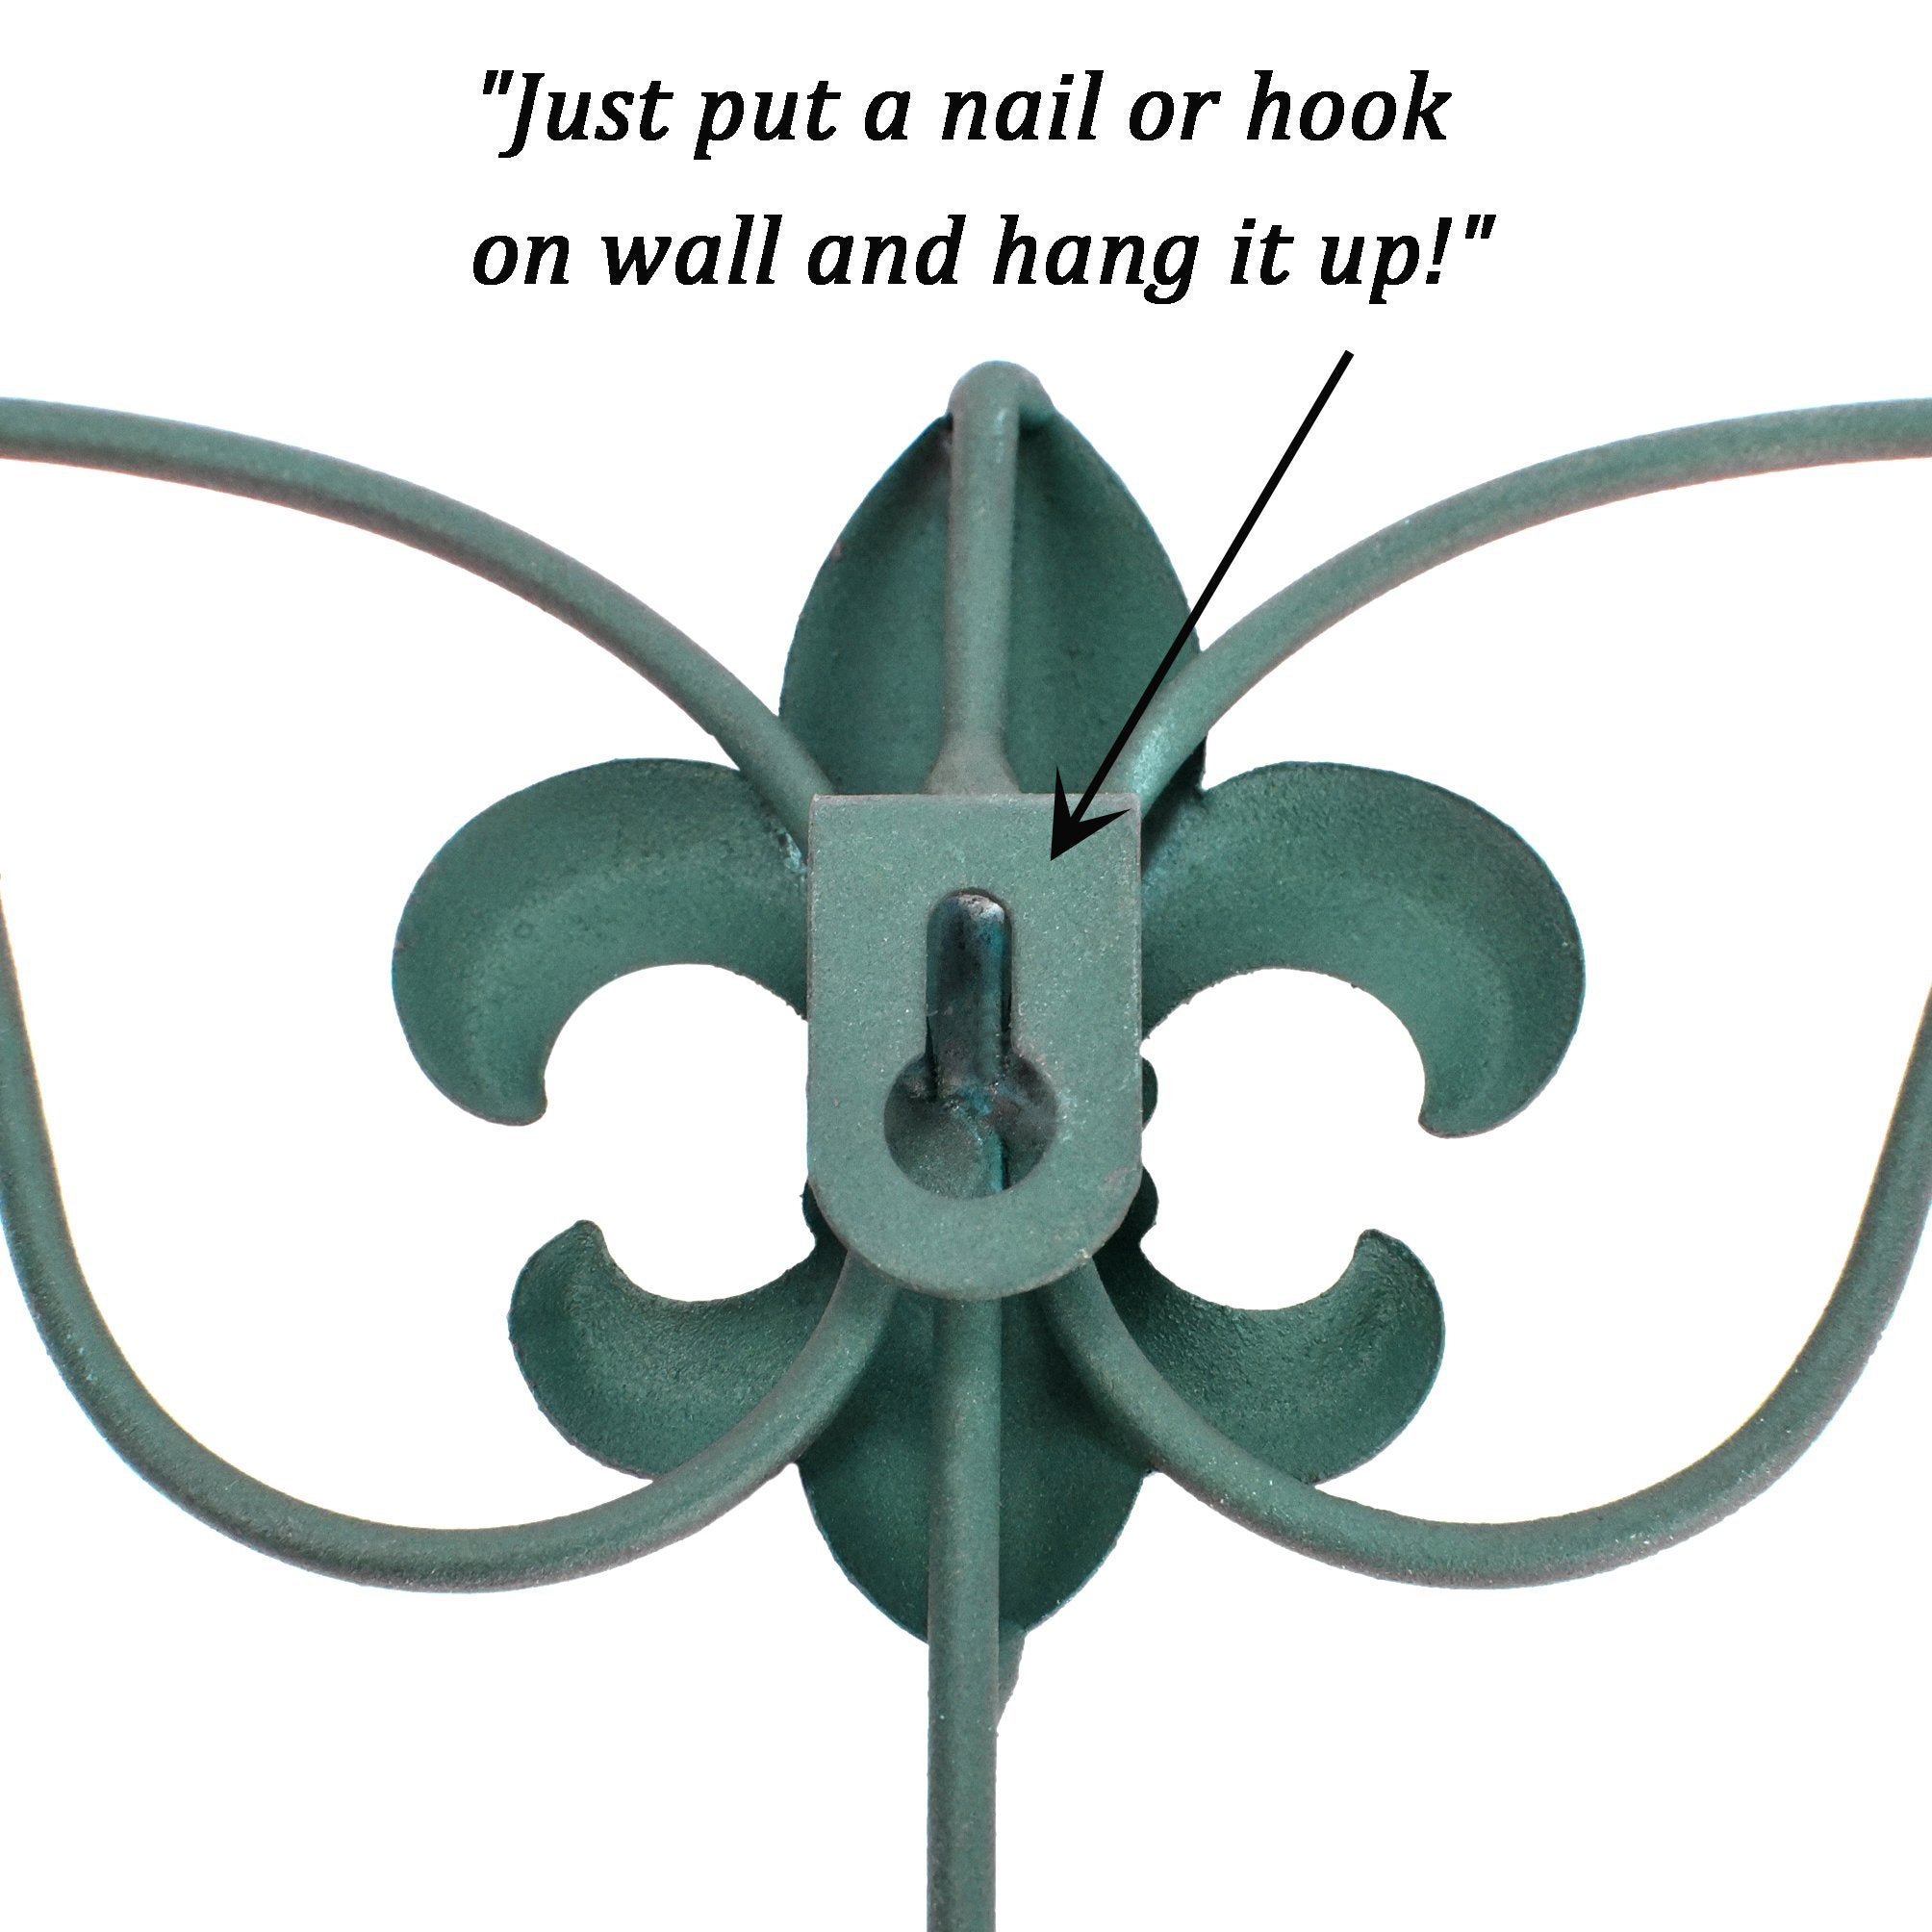 16" Hand Made Iron Wall Medallion, Home, Room Decoration, Home Decor 100% Lead Free Paint, Teal Color. Great Gift idea for Your Loved one!  - Like New